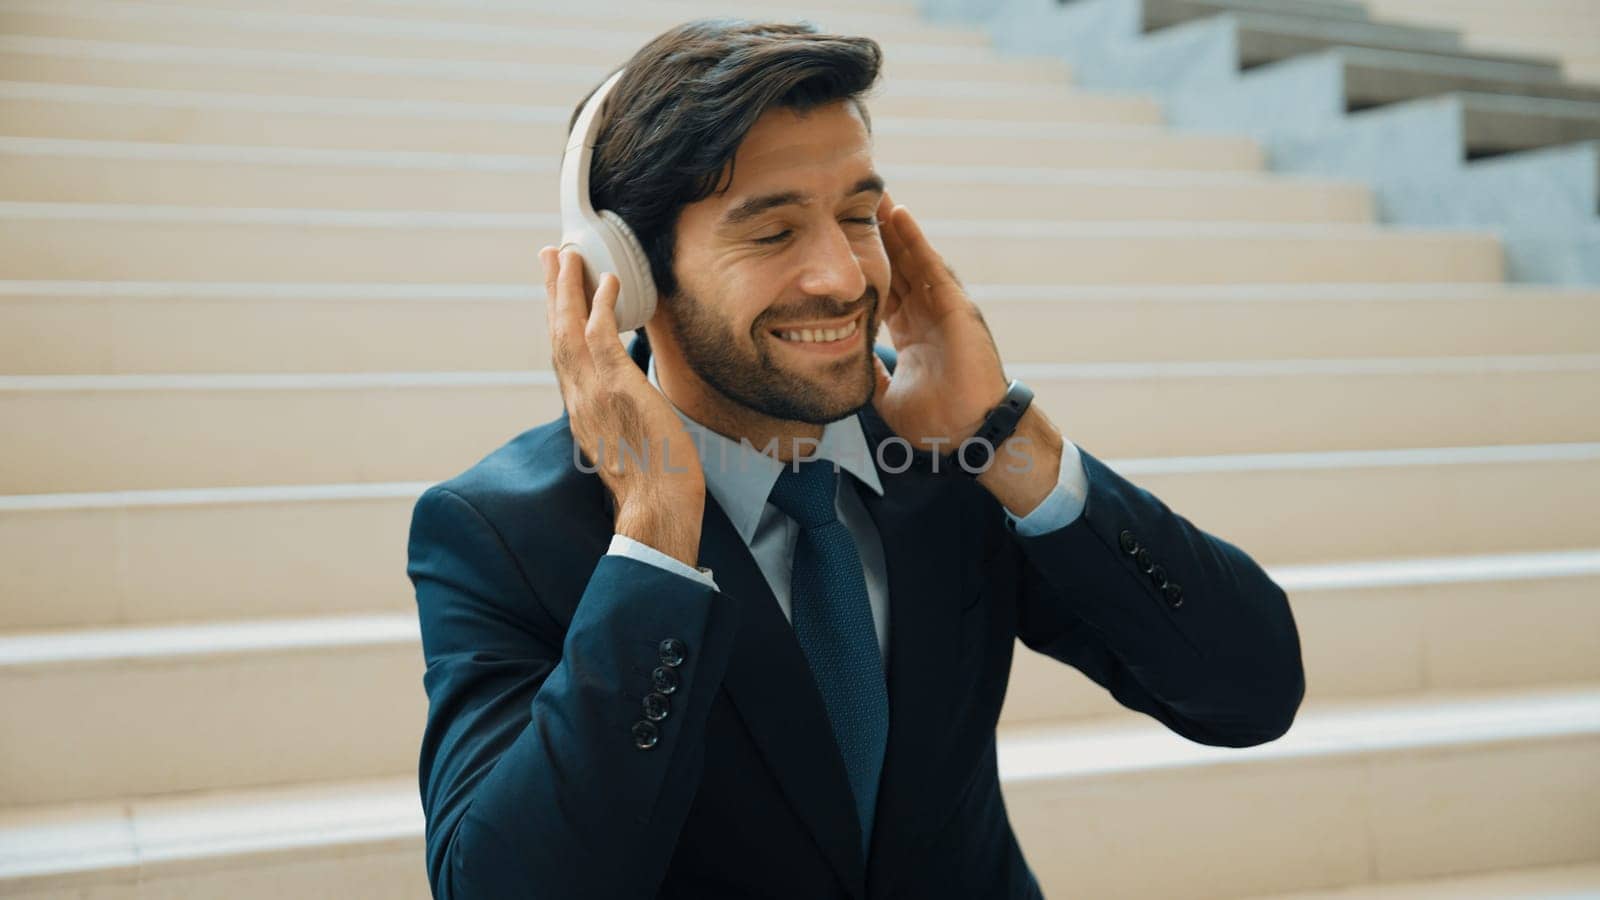 Closeup image of professional business man enjoy to listen music by using headphone. Portrait of skilled project manager show facial expression about joy and happy while sitting at mall. Exultant.